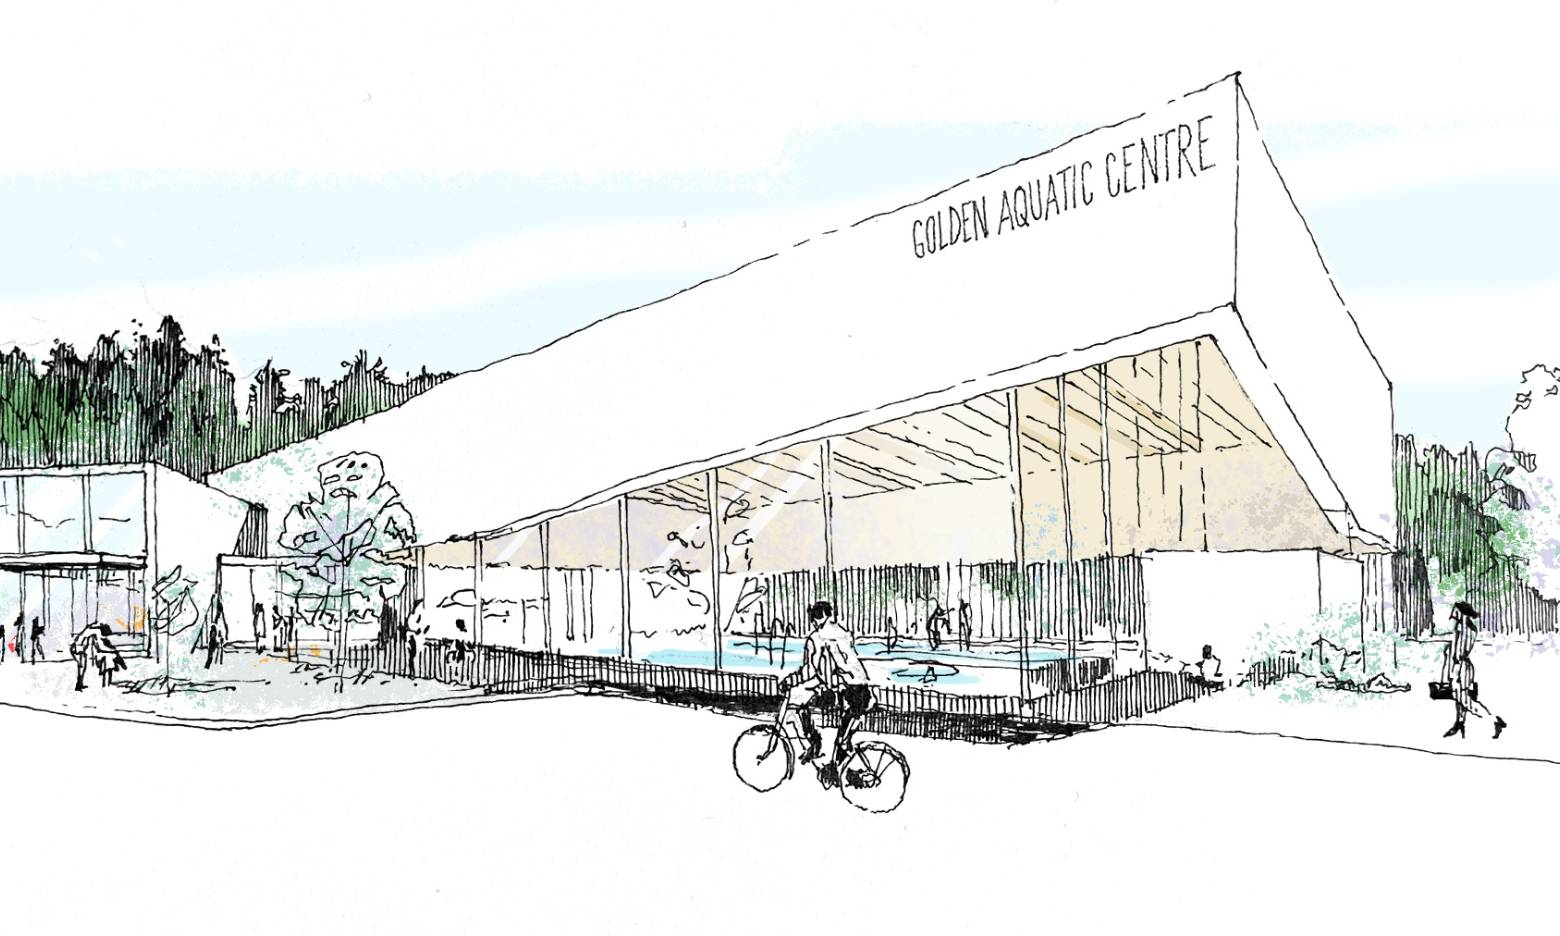 Illustration of a community centre with a pool visible through the window.